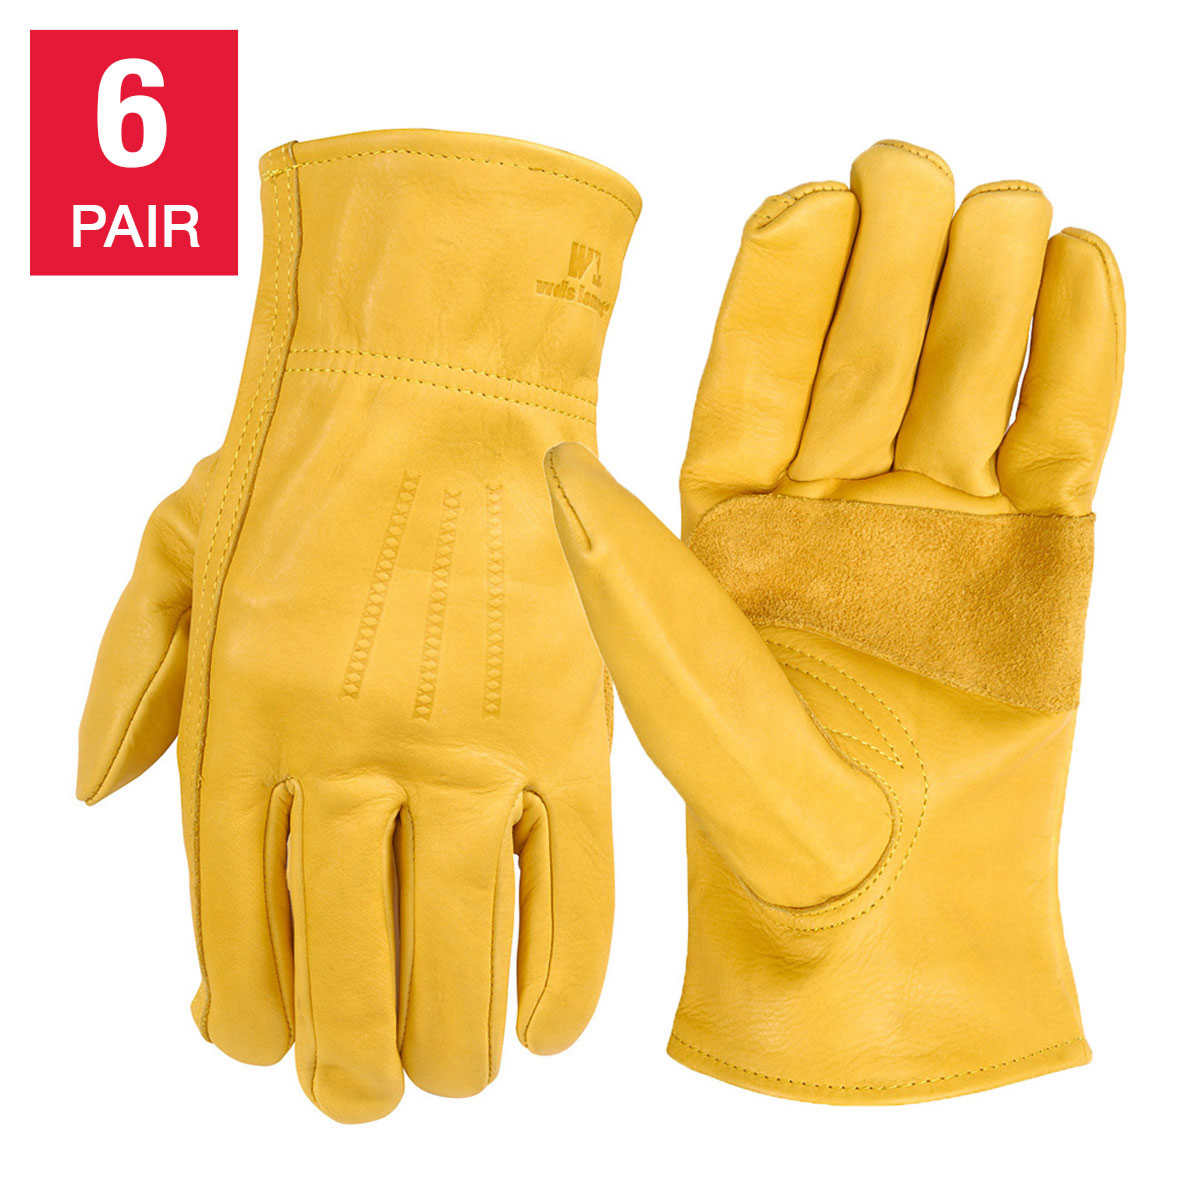 L 4-PAIR ECONOMIC DRIVER WORK GLOVES KEYSTONE COW GRAIN WITH SPLIT LEATHER BACK 